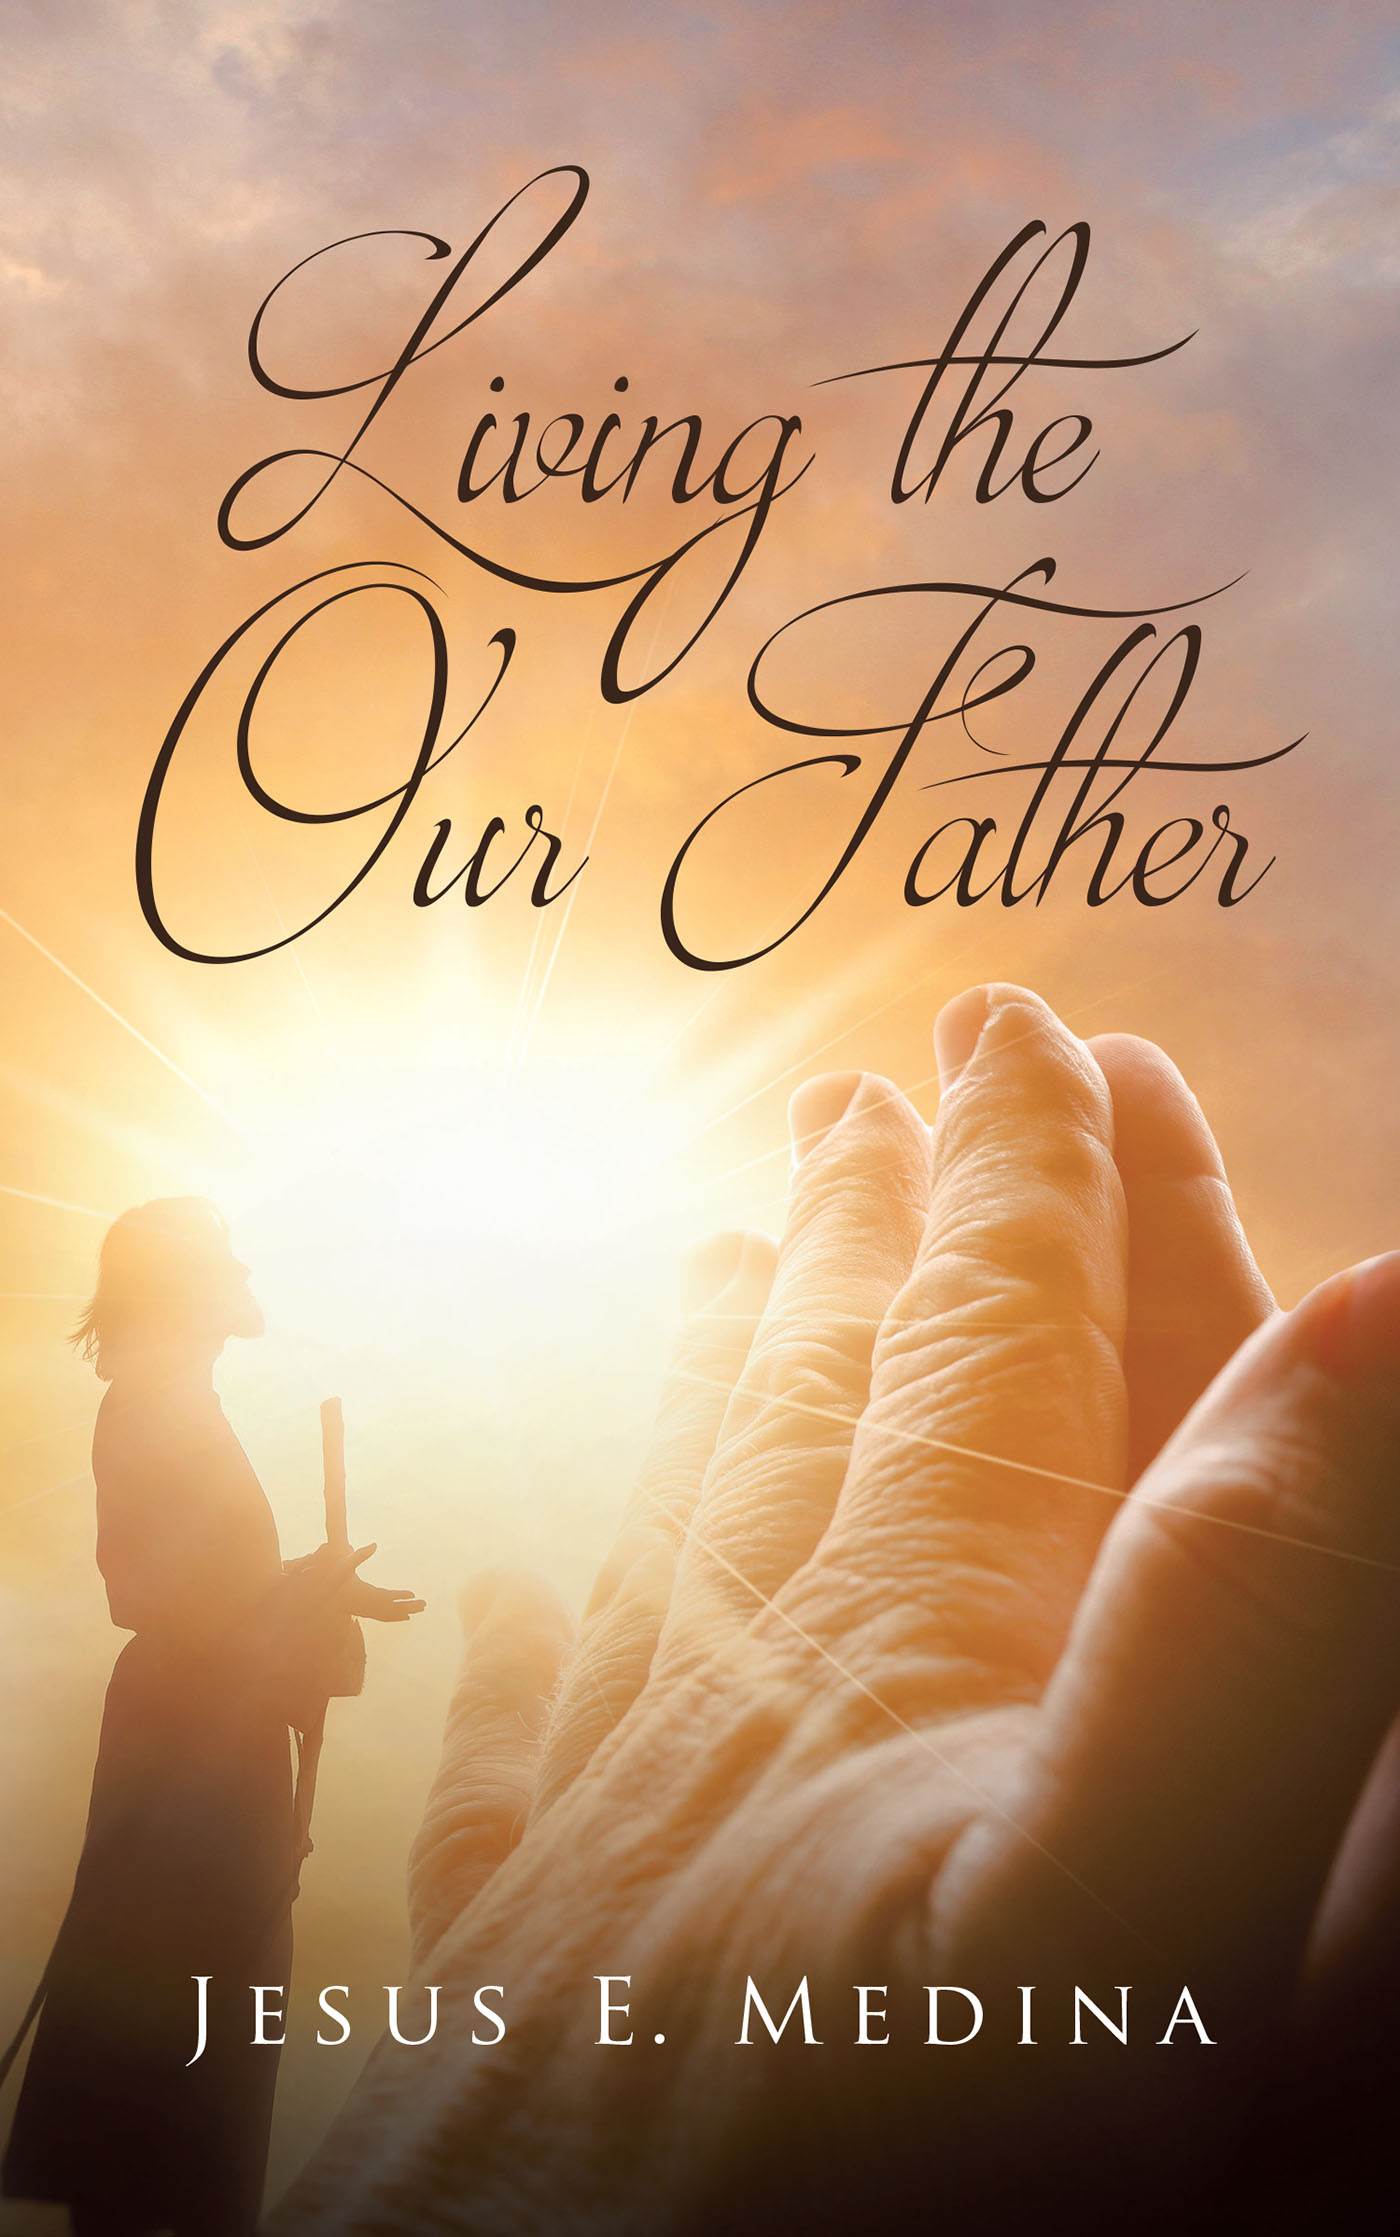 Author Jesus E. Medina’s New Book, "Living the Our Father," Serves as an In-Depth Guide for Readers Seeking to Live in a Deeper Connection with God